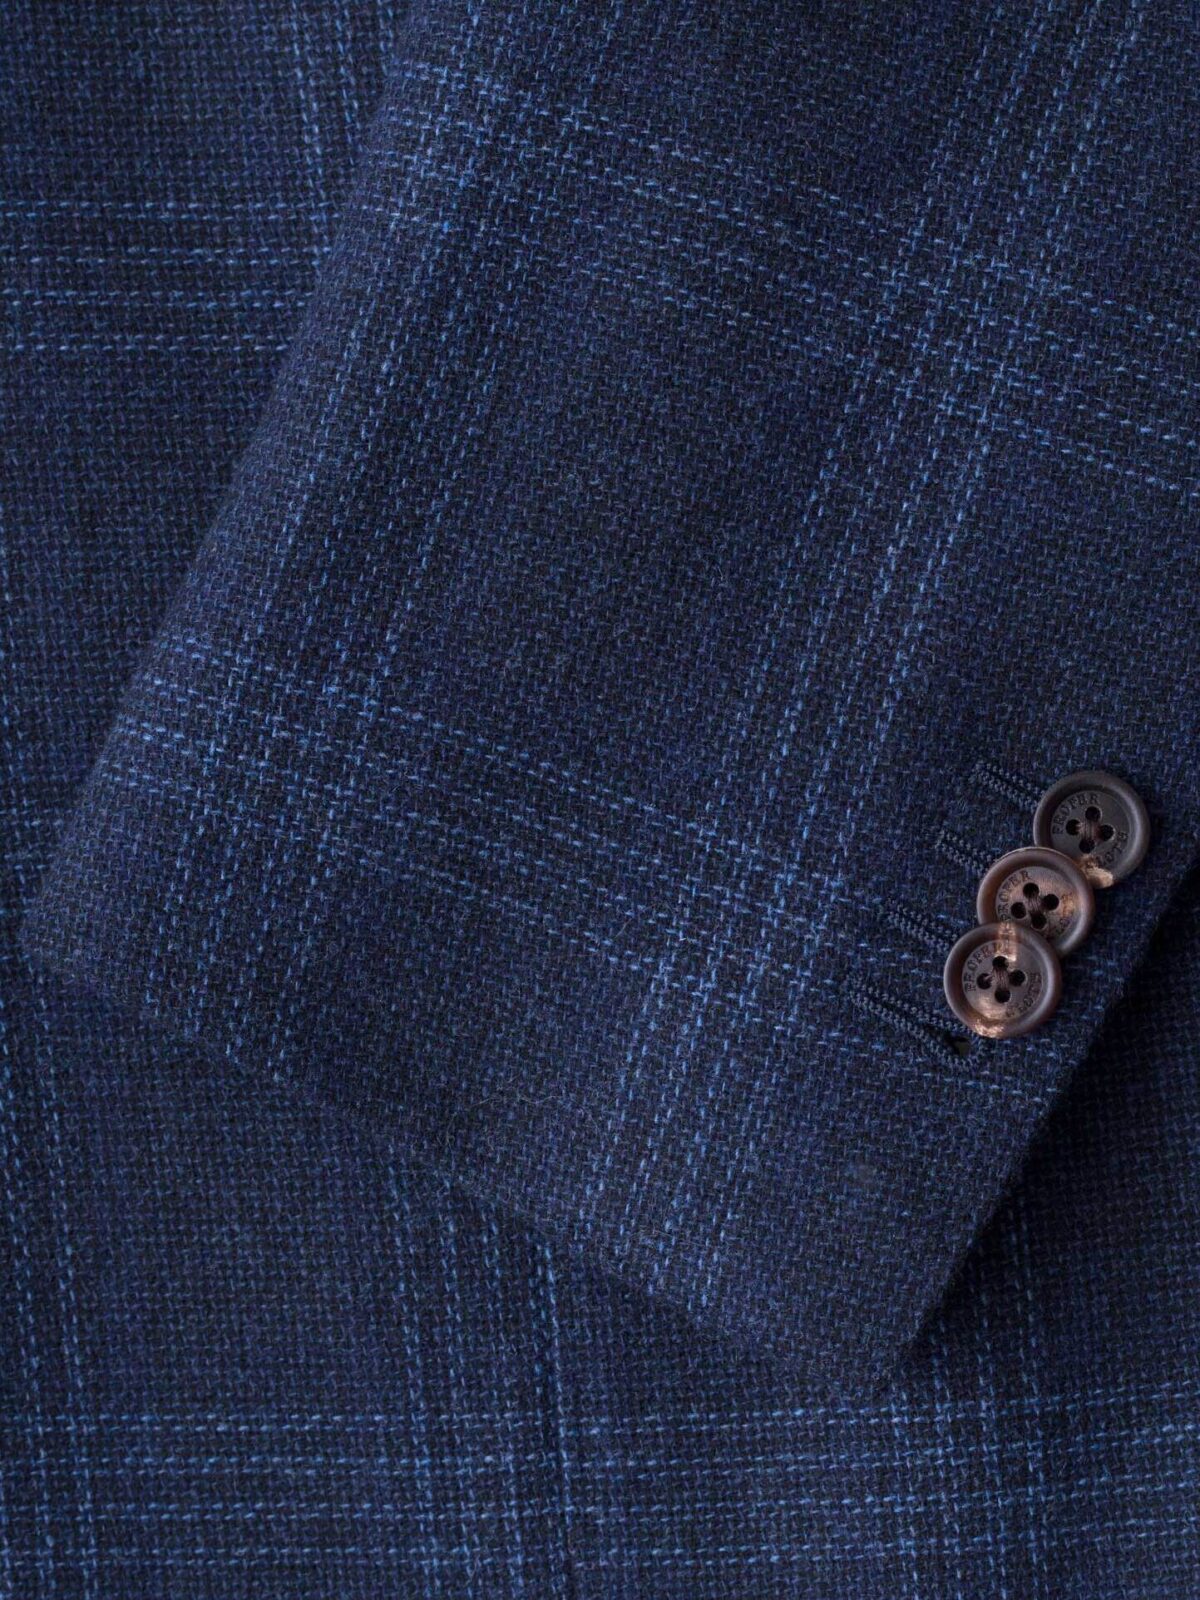 Hudson Navy and Blue Check Textured Wool Jacket